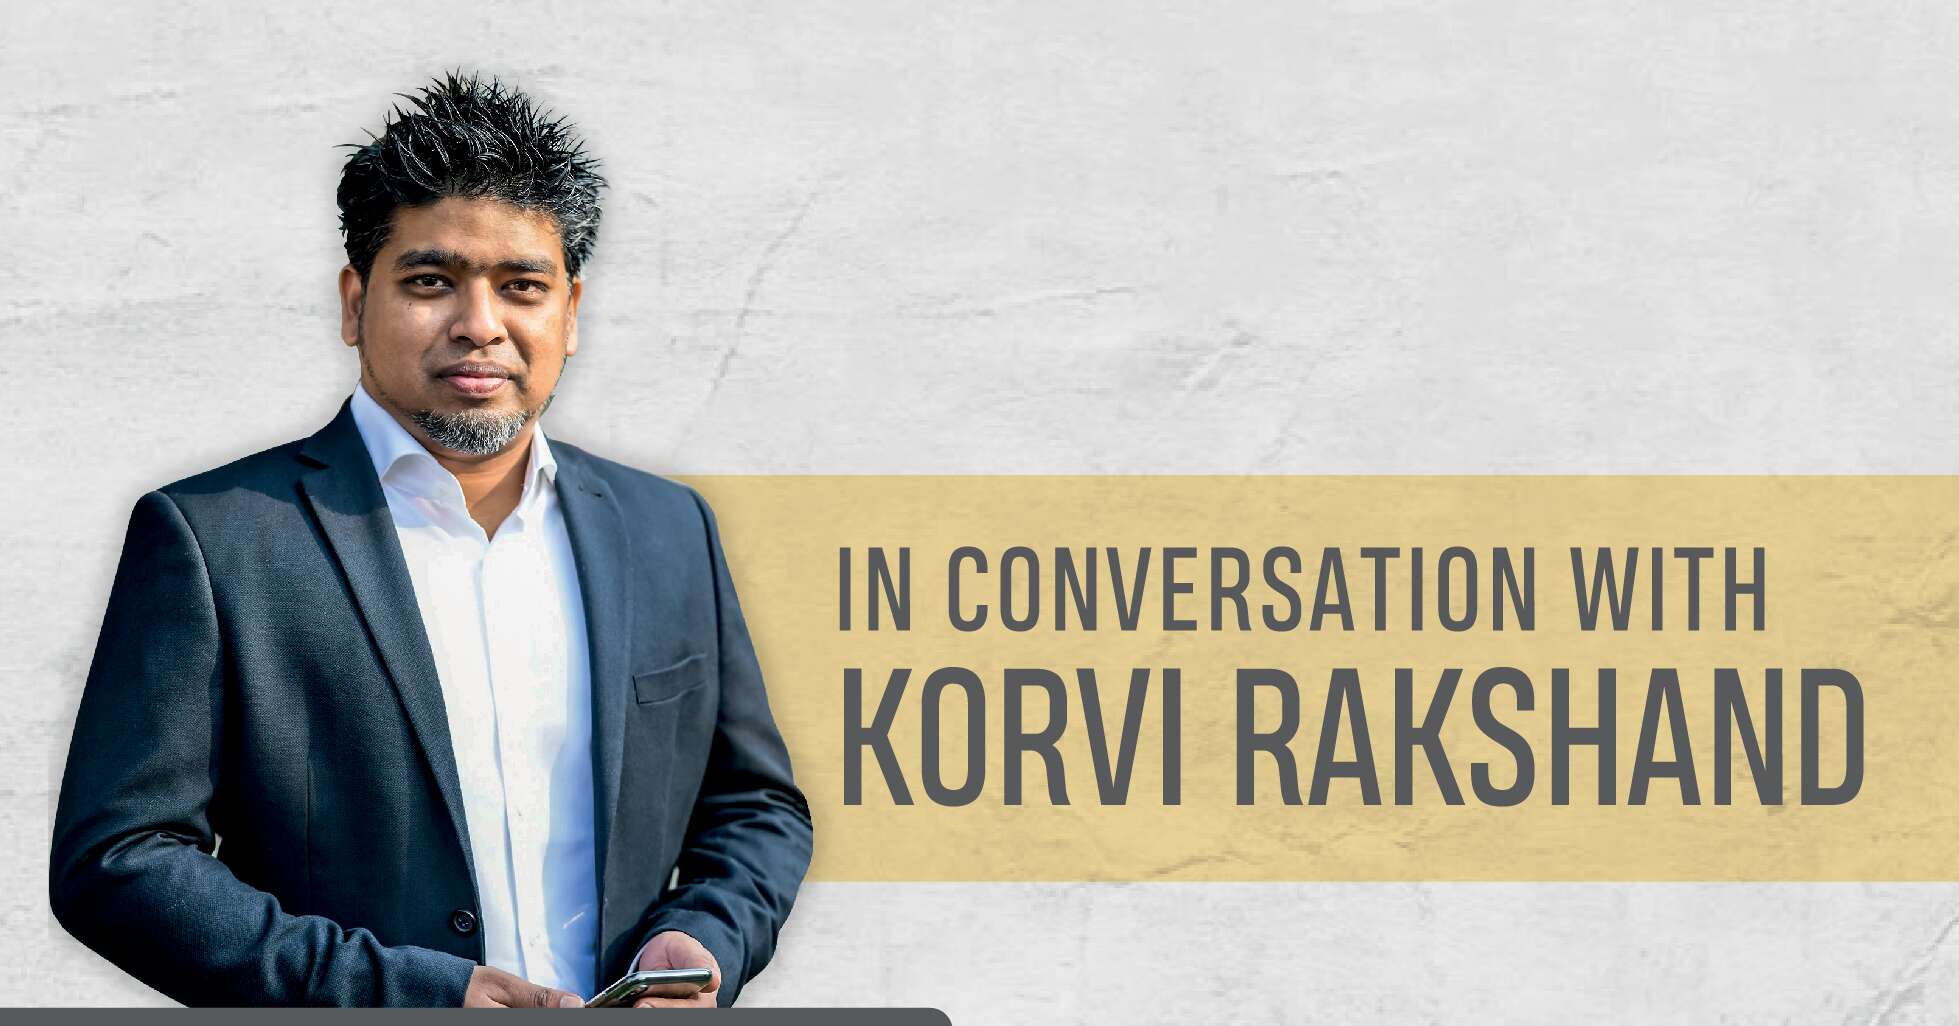 You are currently viewing IN CONVERSATION WITH KORVI RAKSHAND